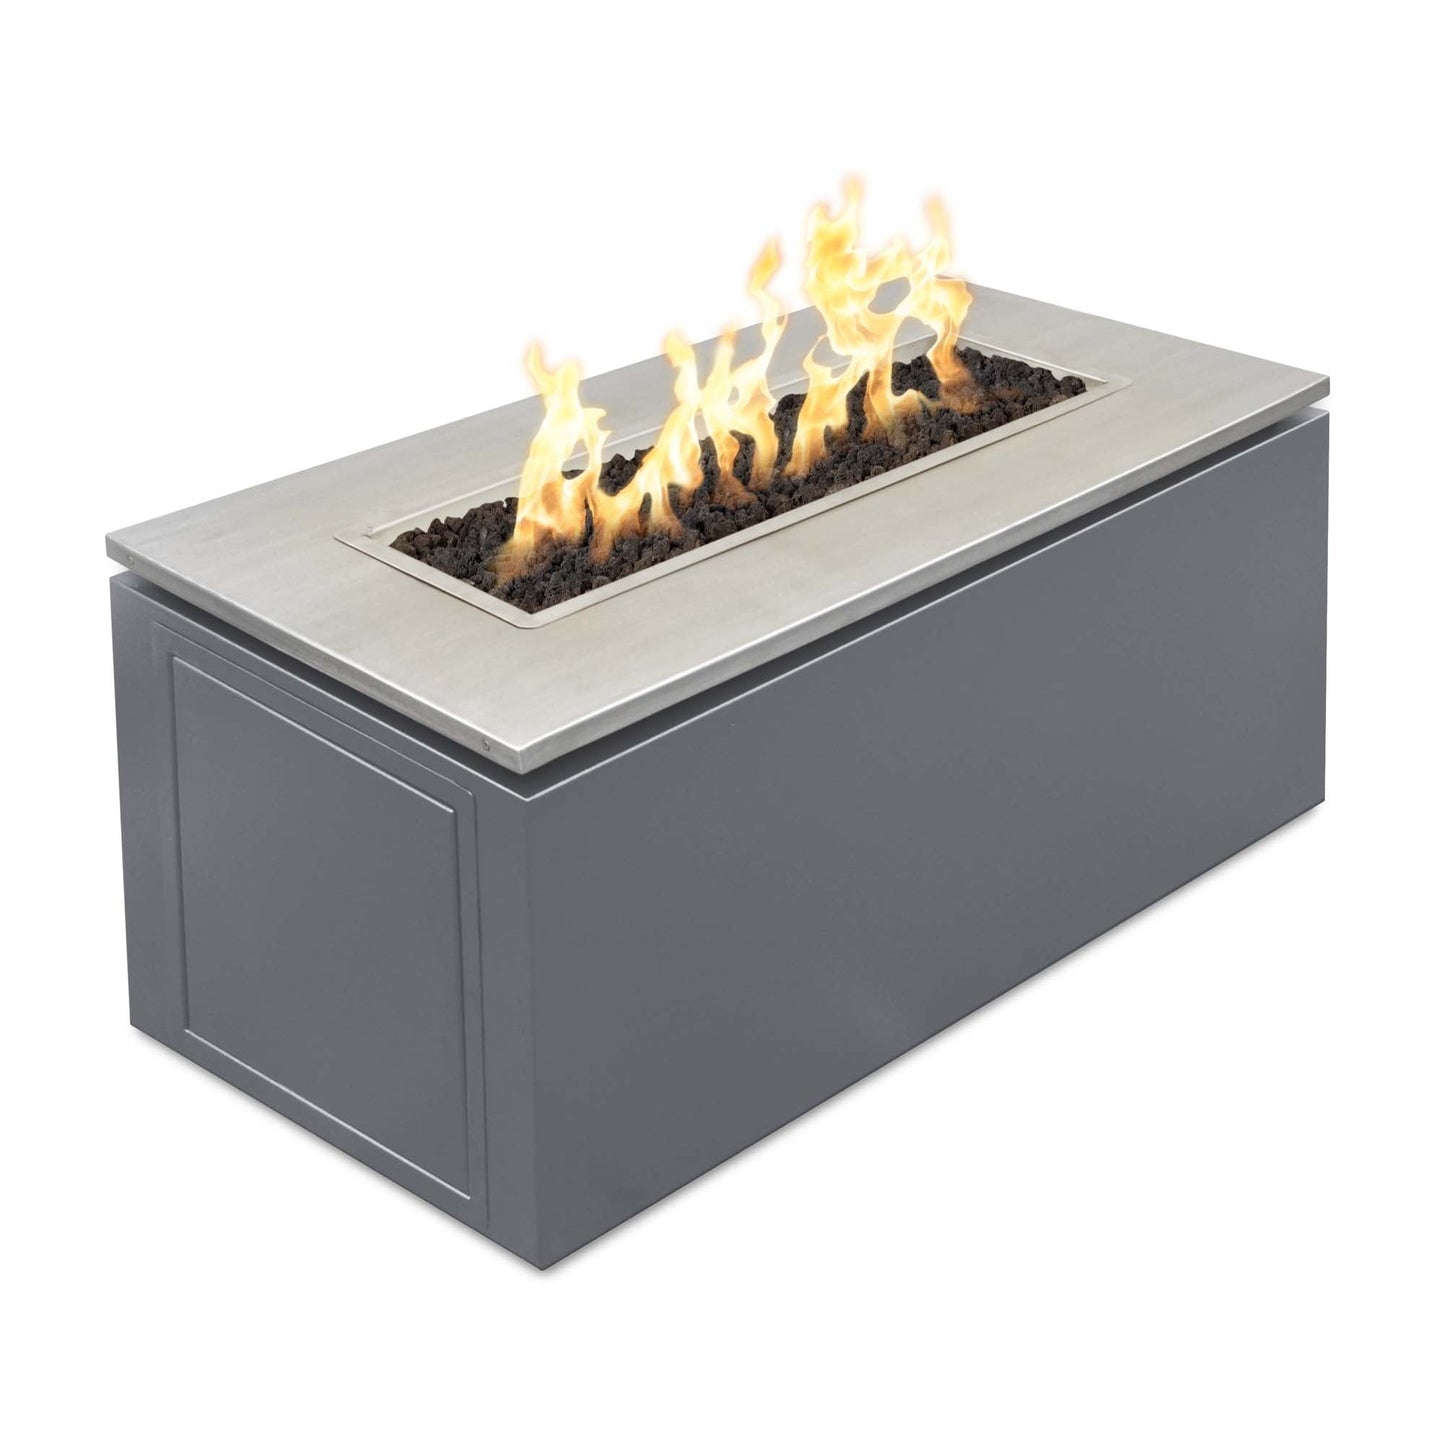 The Outdoor Plus Rectangular Merona 46" Corten Steel Liquid Propane Fire Pit with 110V Electronic Ignition